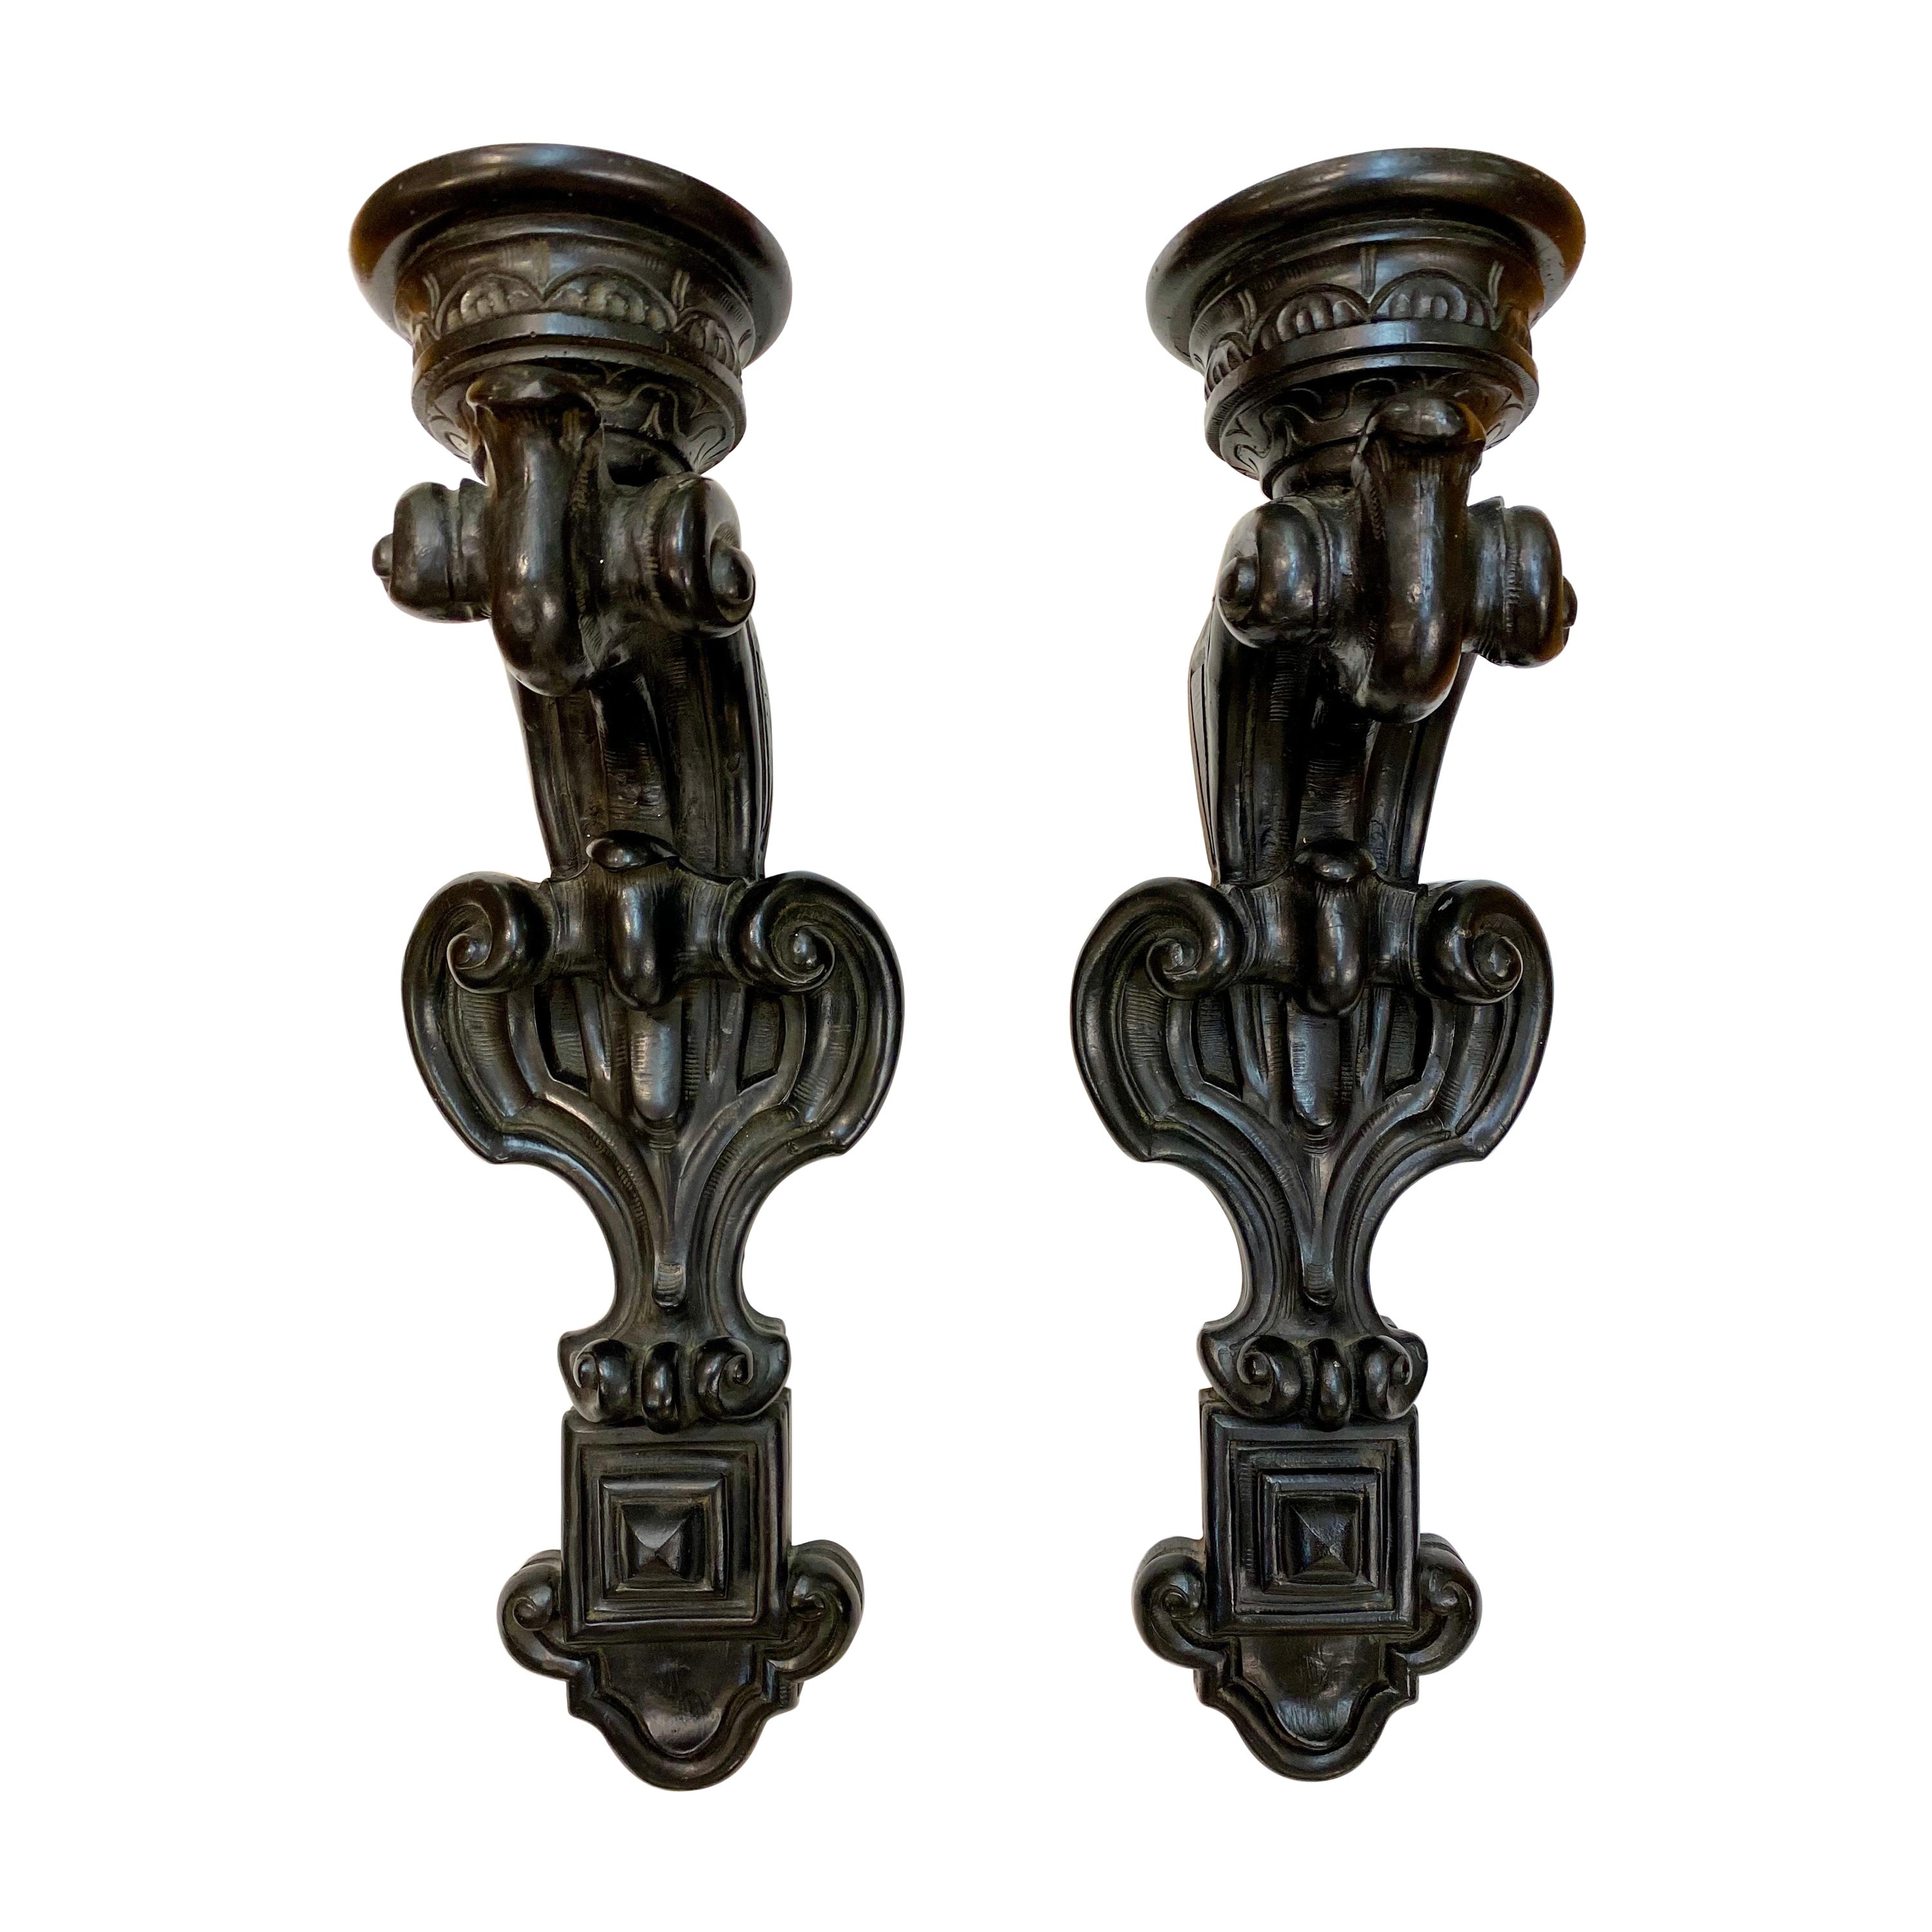 Baroque Style Pair of Candle Holder Sconces For Sale